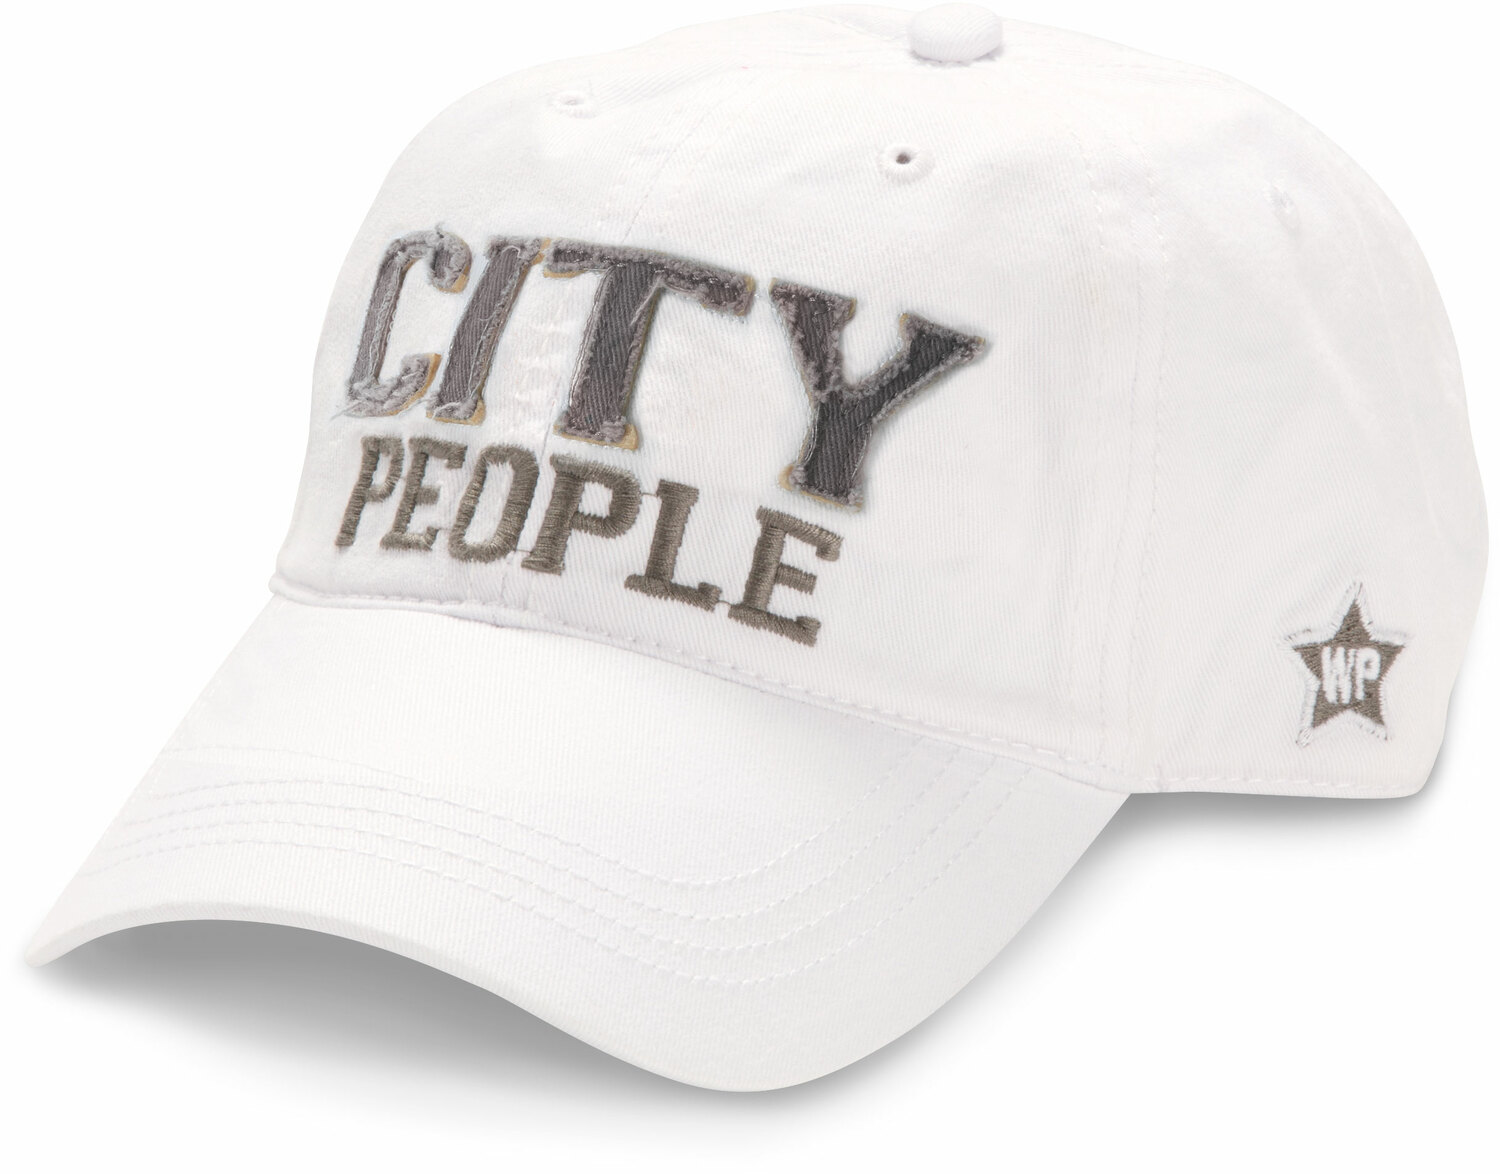 City People by We People - City People - White Adjustable Hat